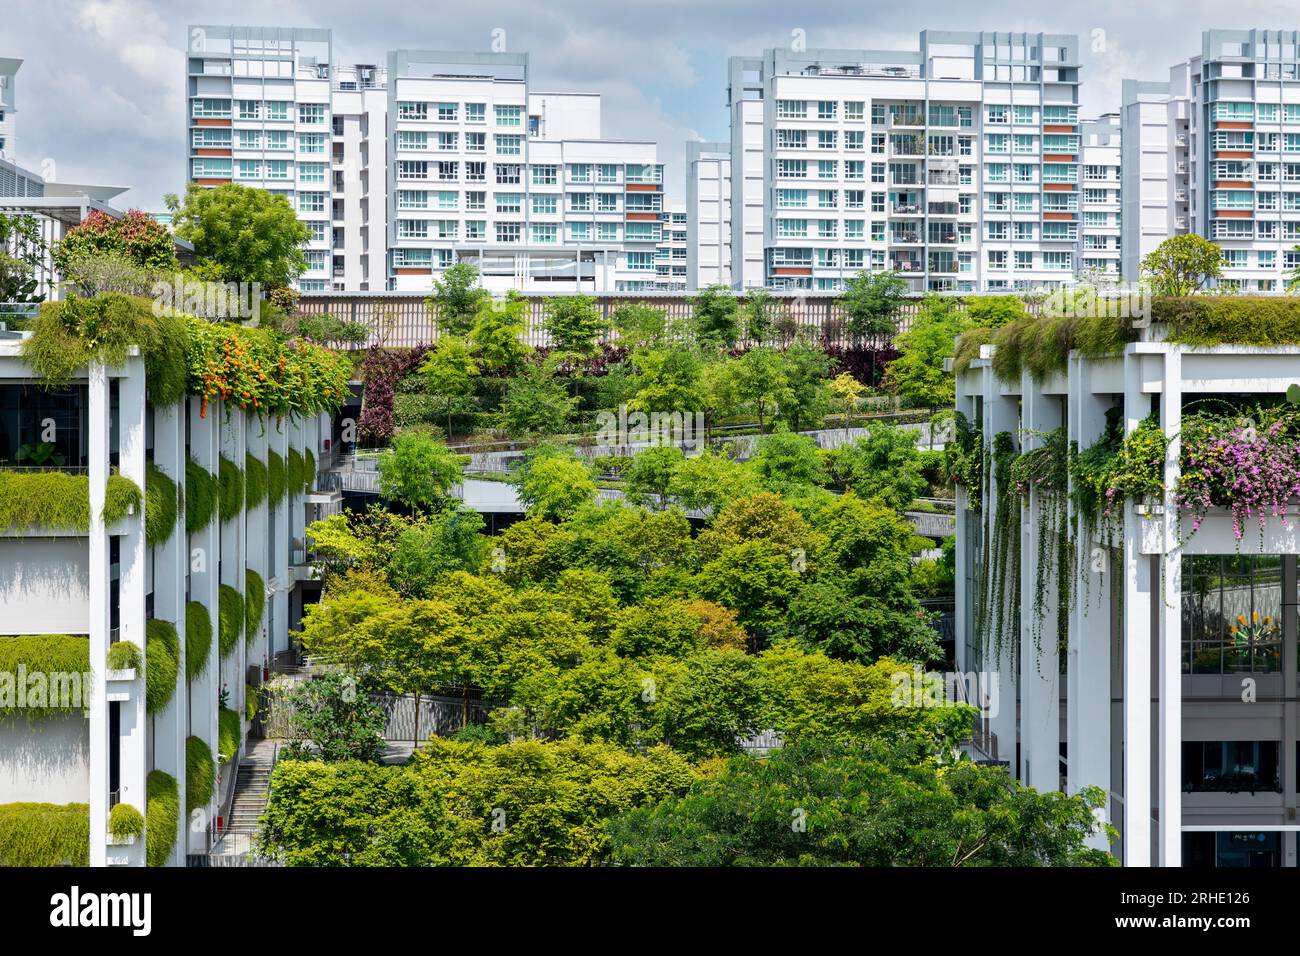 Oasis Terraces in Singapore, a green roof provides an urban nature ...